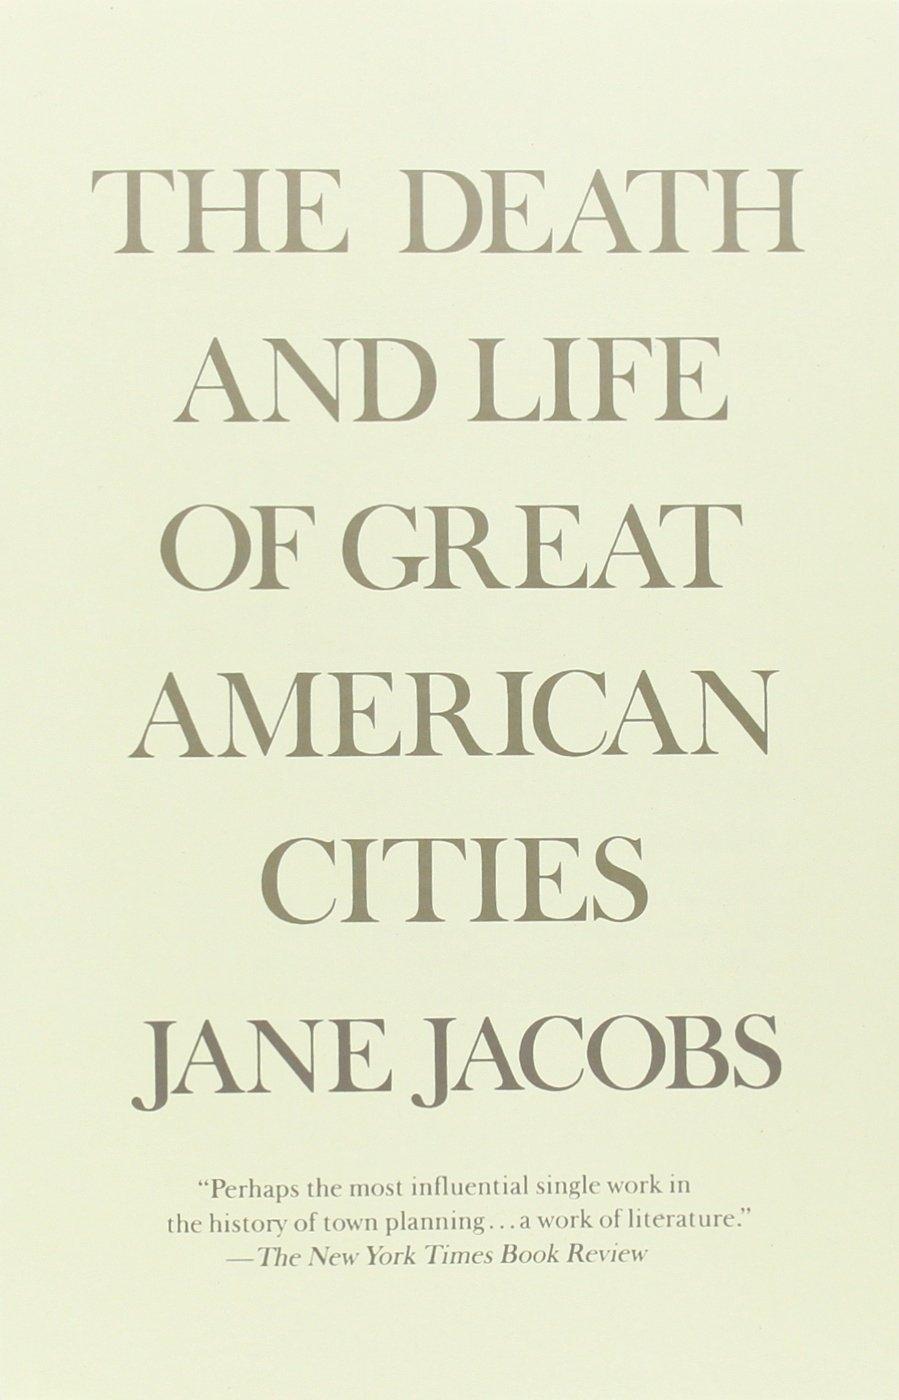 THE DEATH AND LIFE OF GREAT AMERICAN CITIES. 